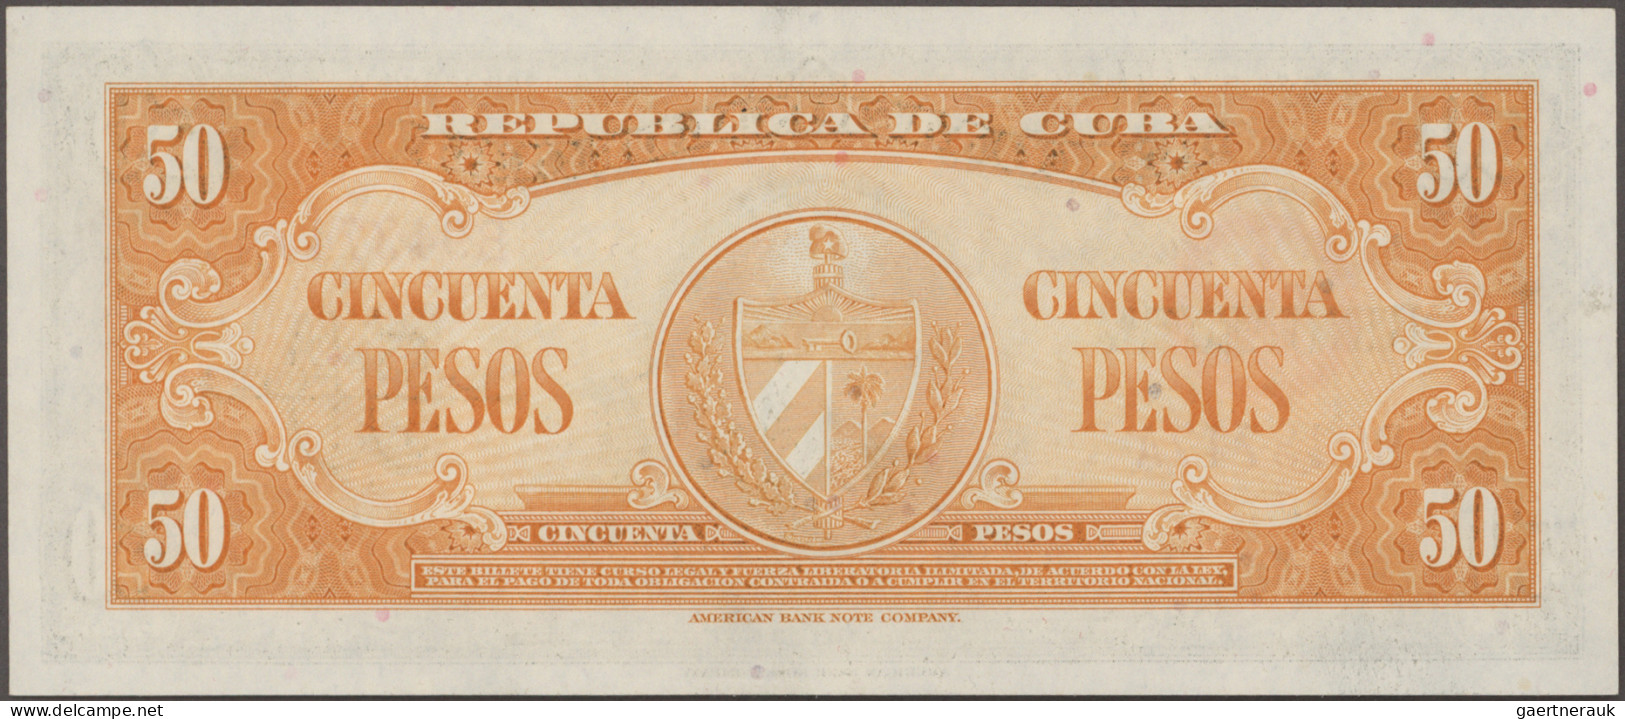 Cuba: Huge lot with 53 banknotes, 1958 - 2010 series, comprising for example 50